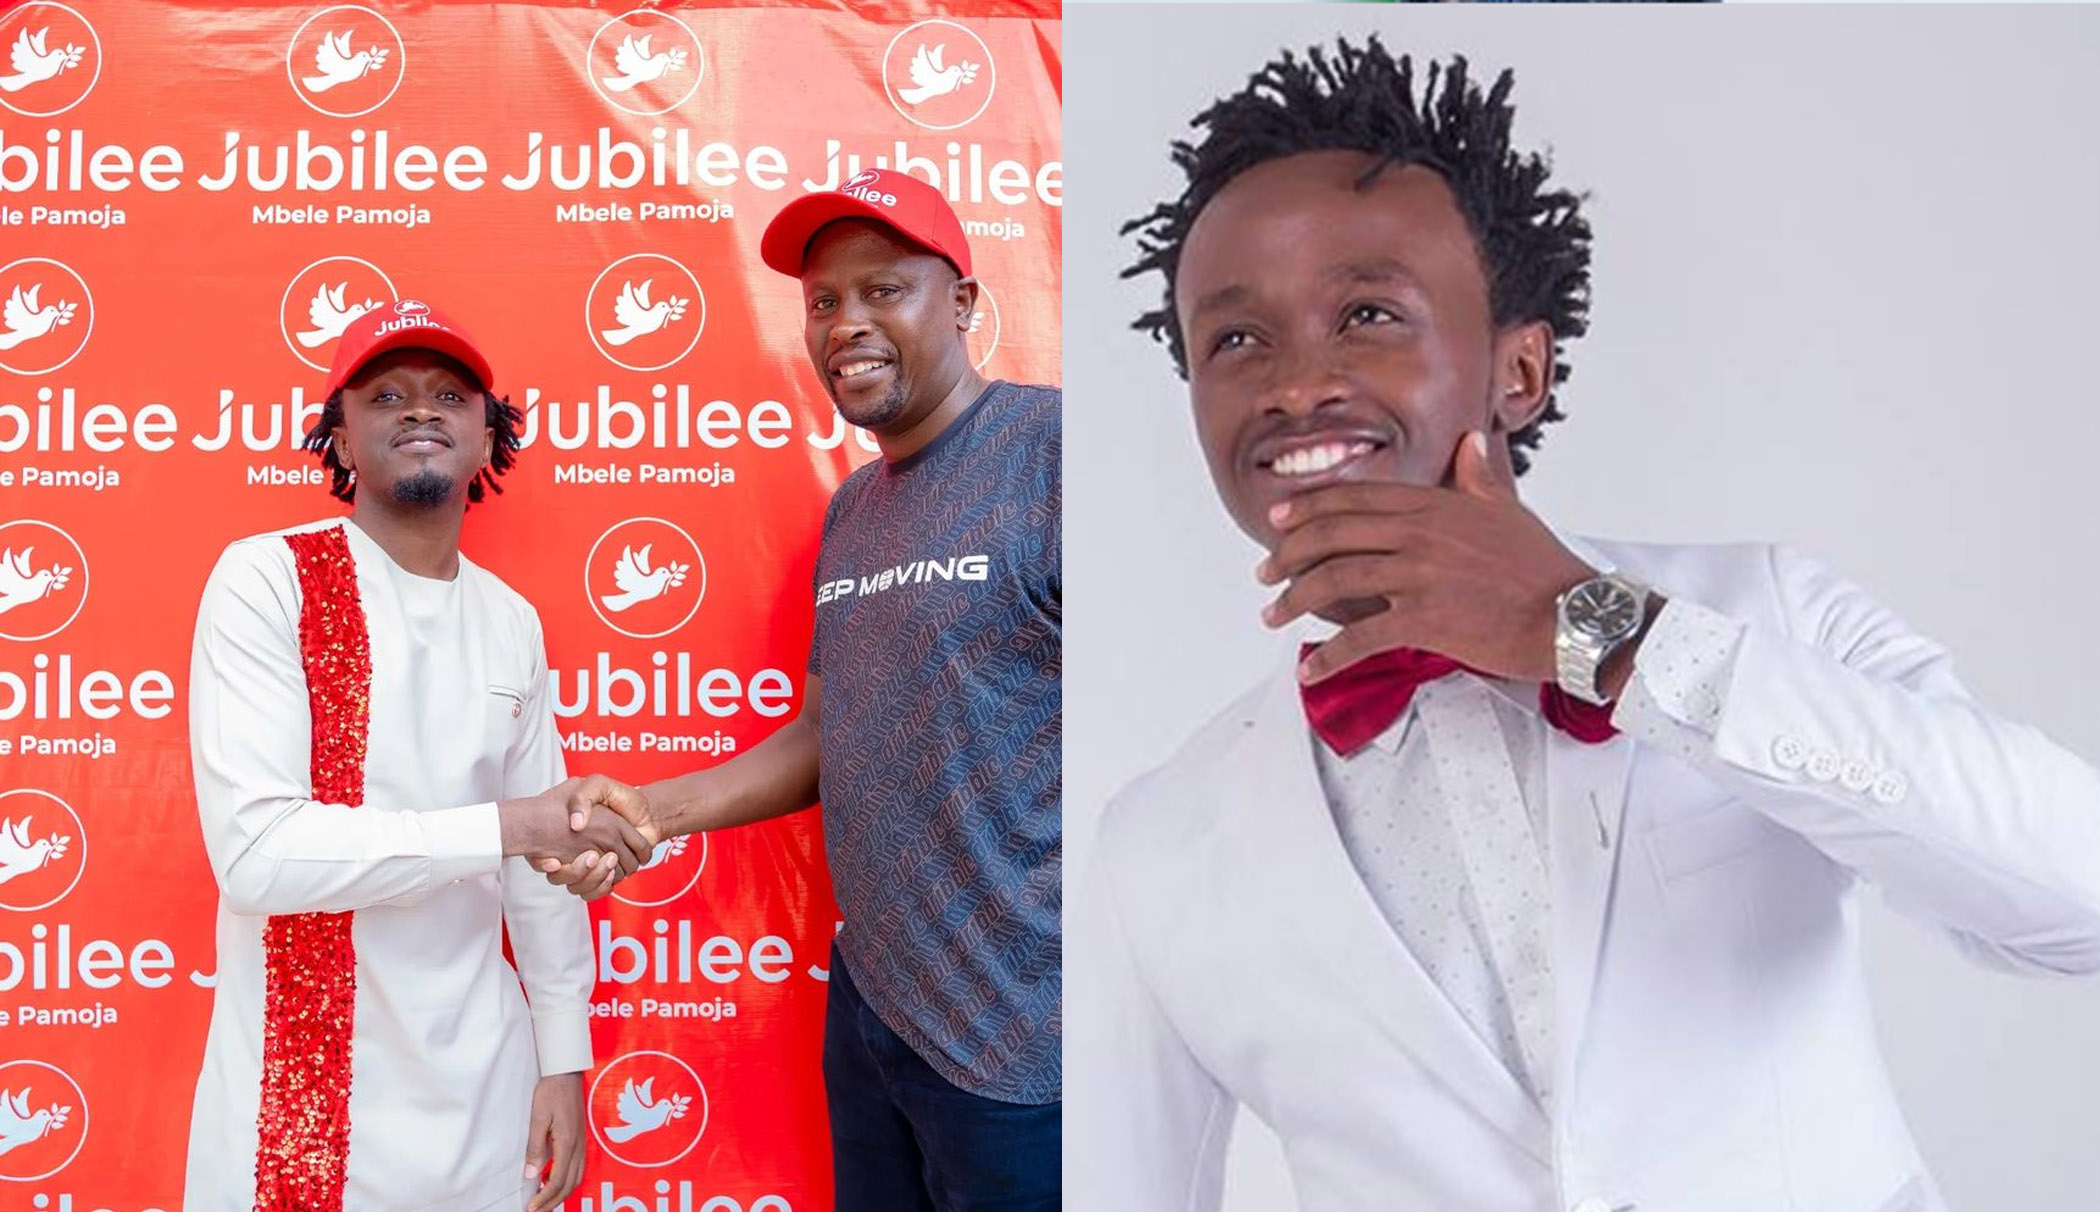 Singer bahati asking for mathare constituency seat